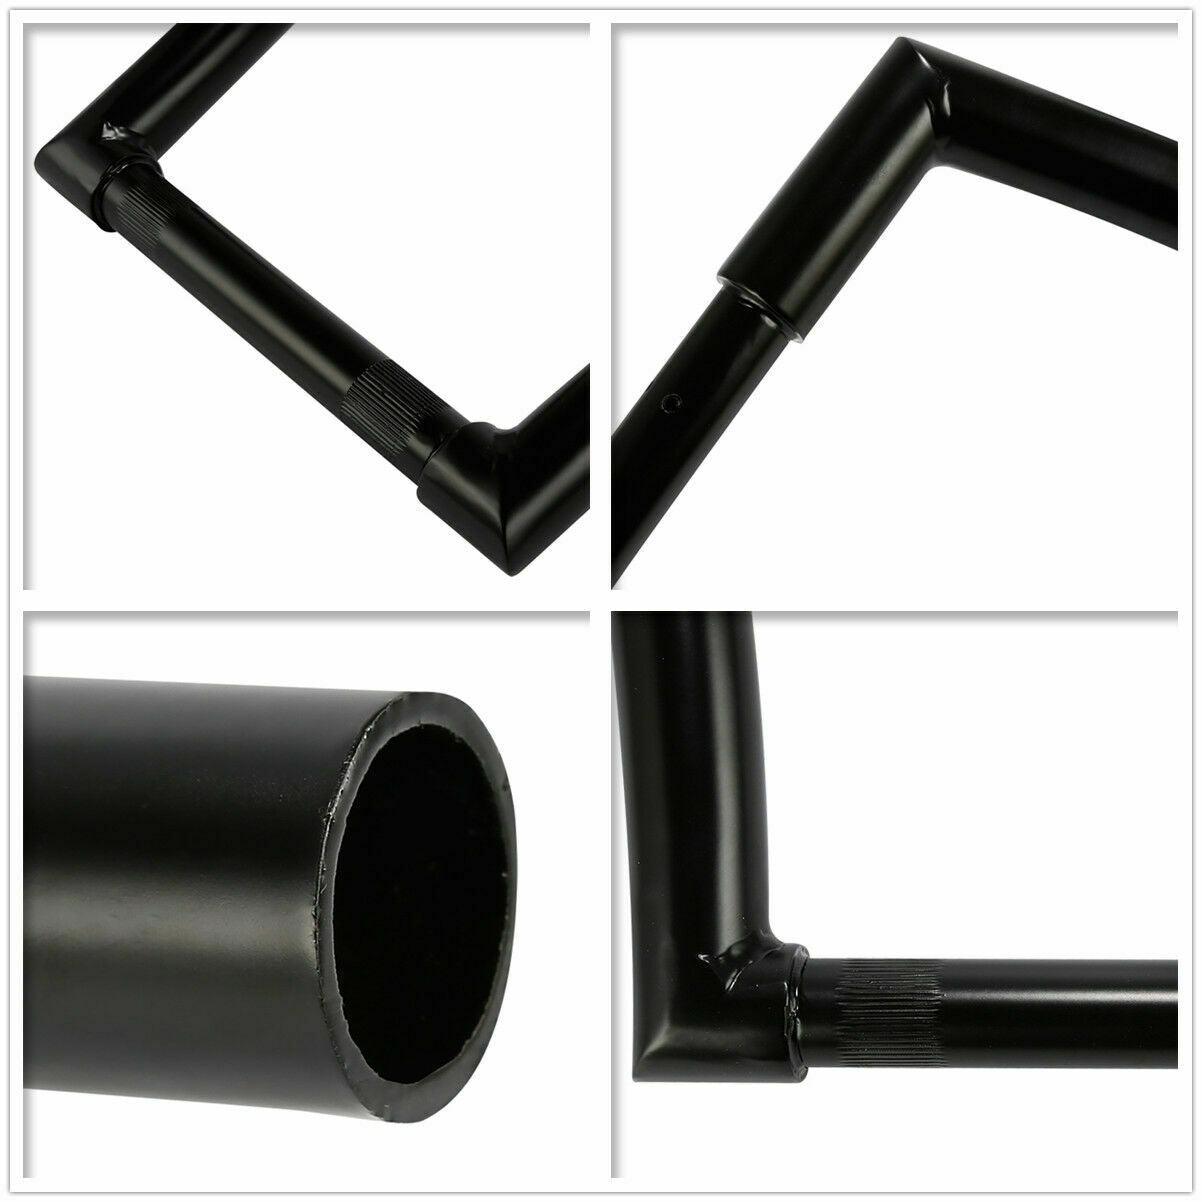 Black Steel Handlebar Fit For Victory Hard Ball 2012-2013 Cross Roads 10-14 13 - Moto Life Products